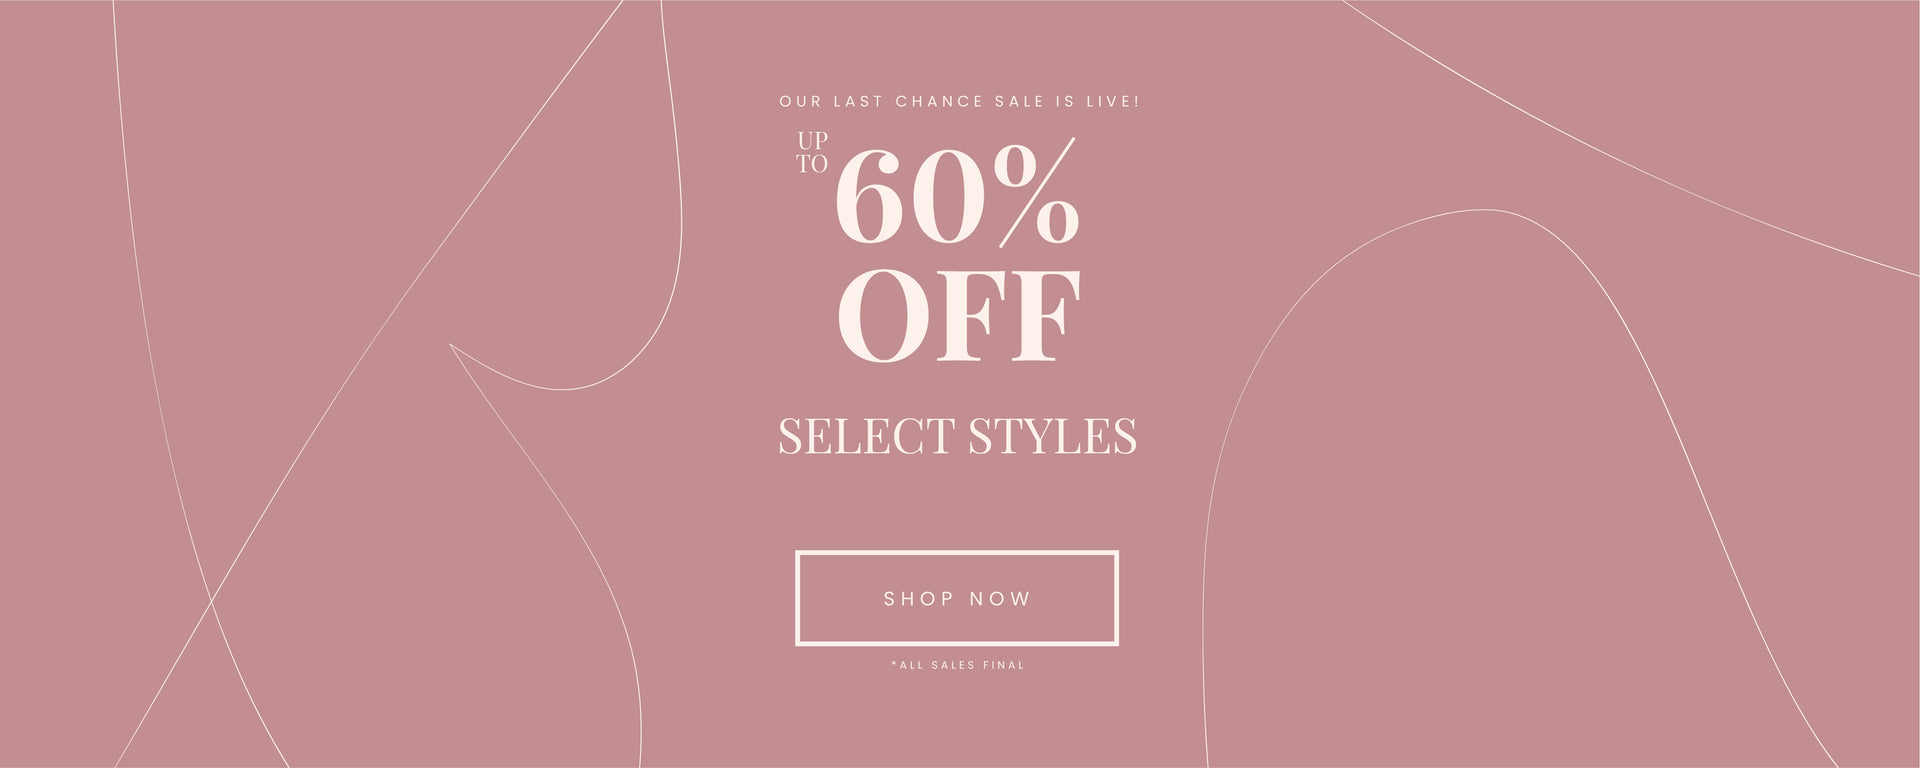 White bold "60% off clearance" test with "final sale" text disclaimer at bottom. Pink background with "shop now" call to action button.